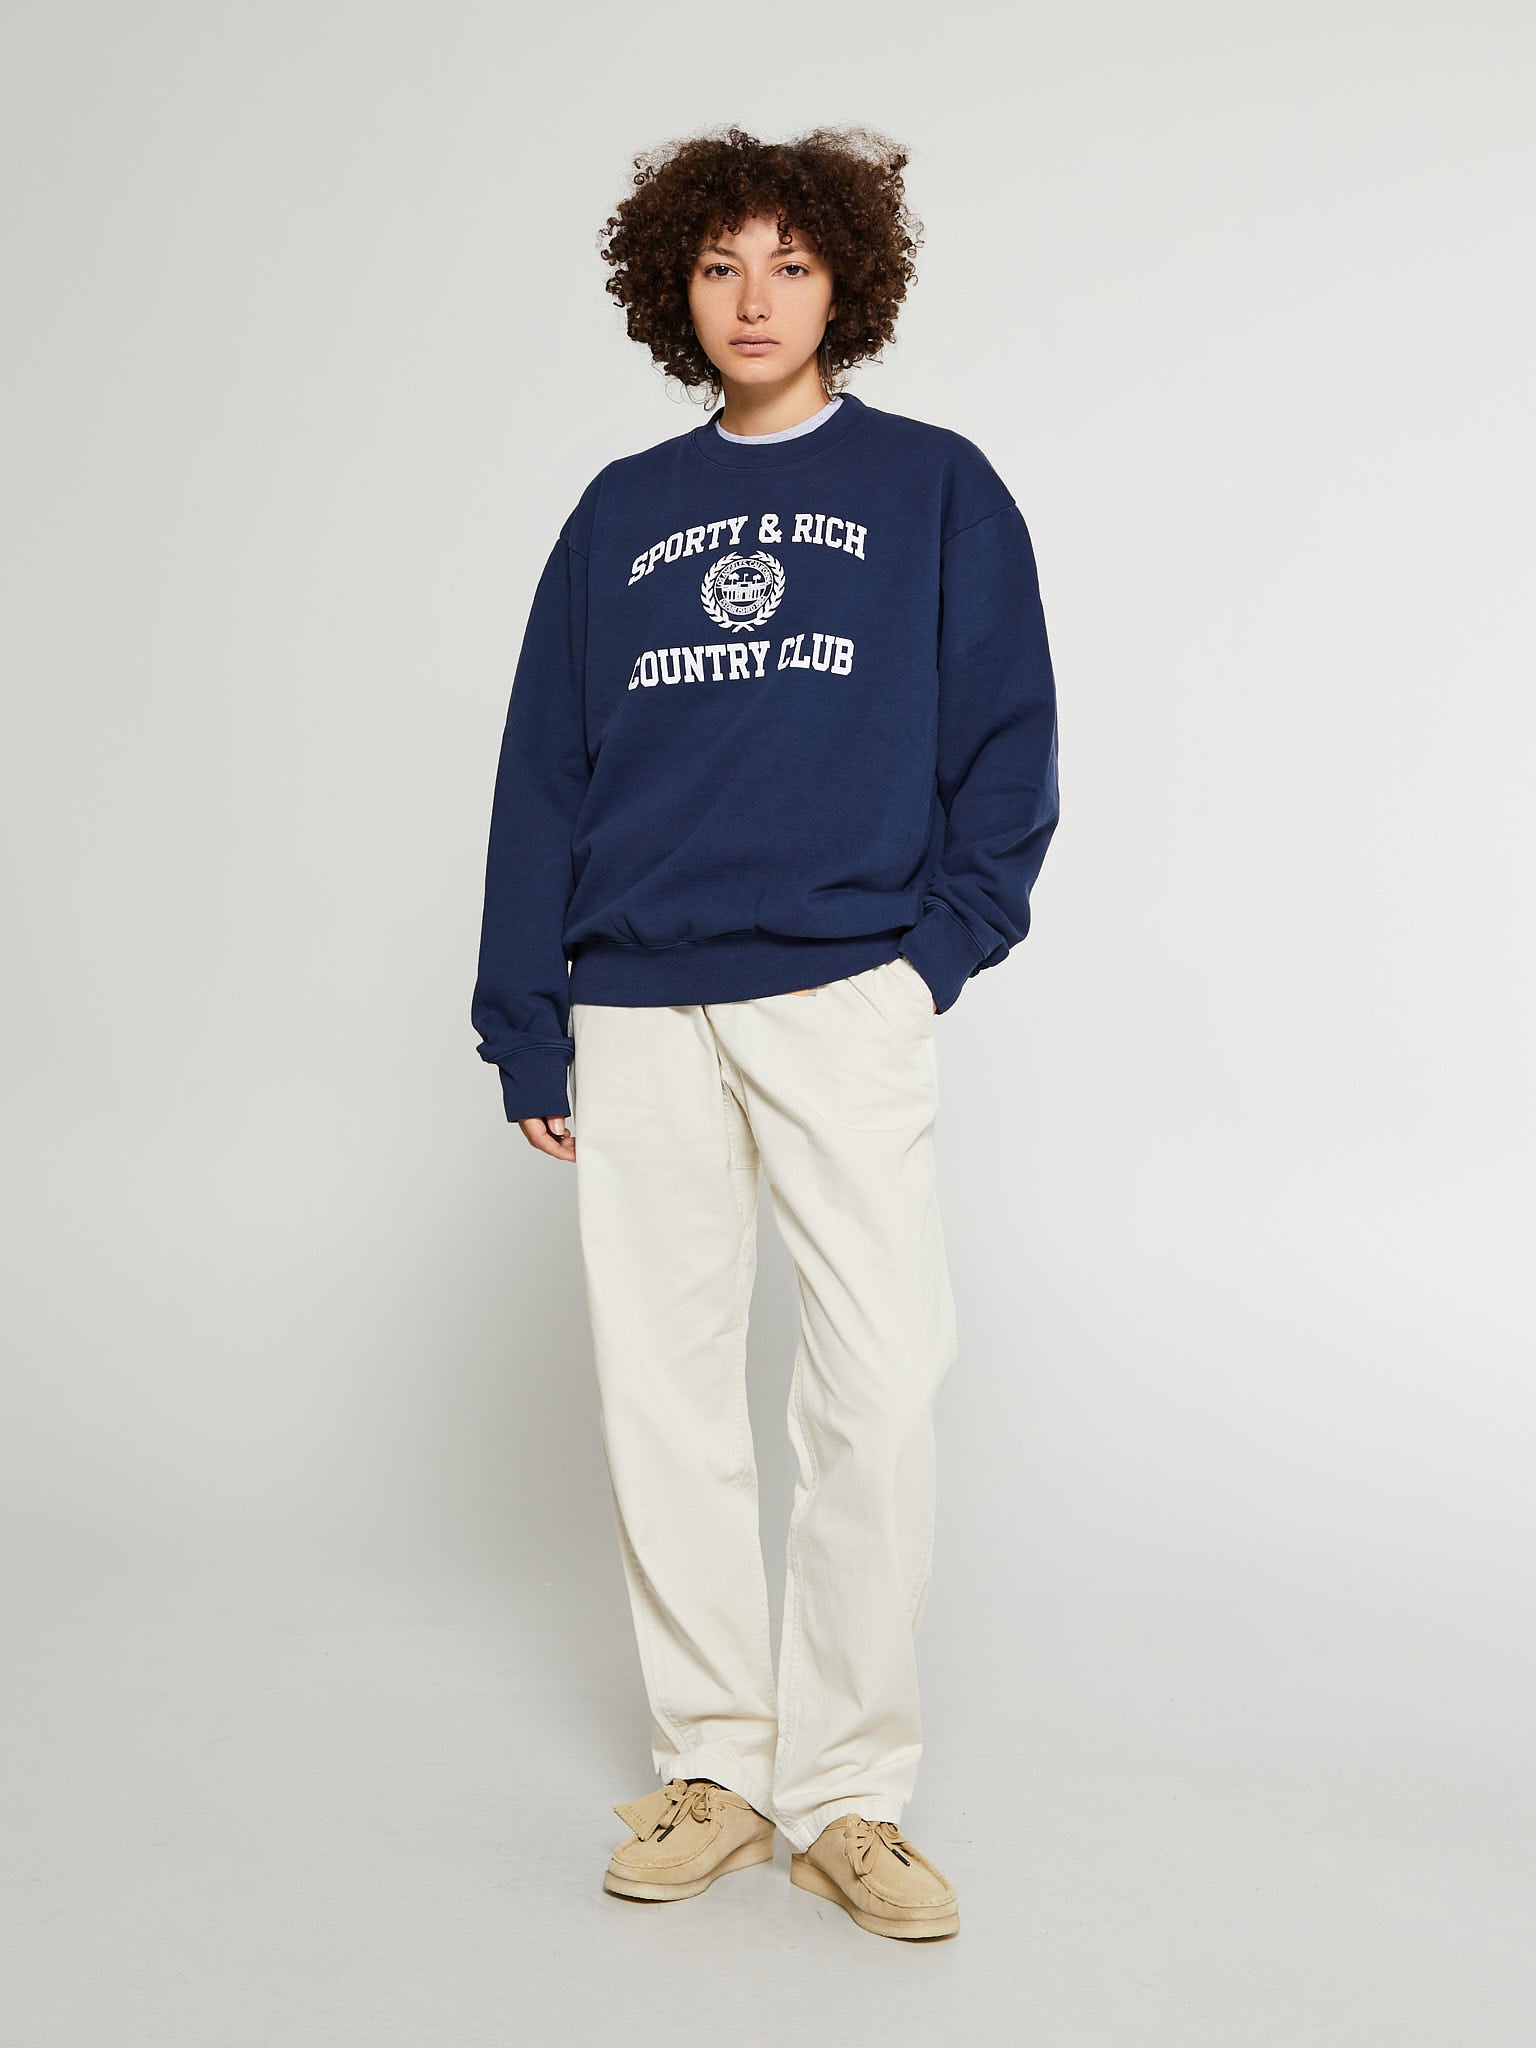 Varsity Crest Crewneck in Navy and White